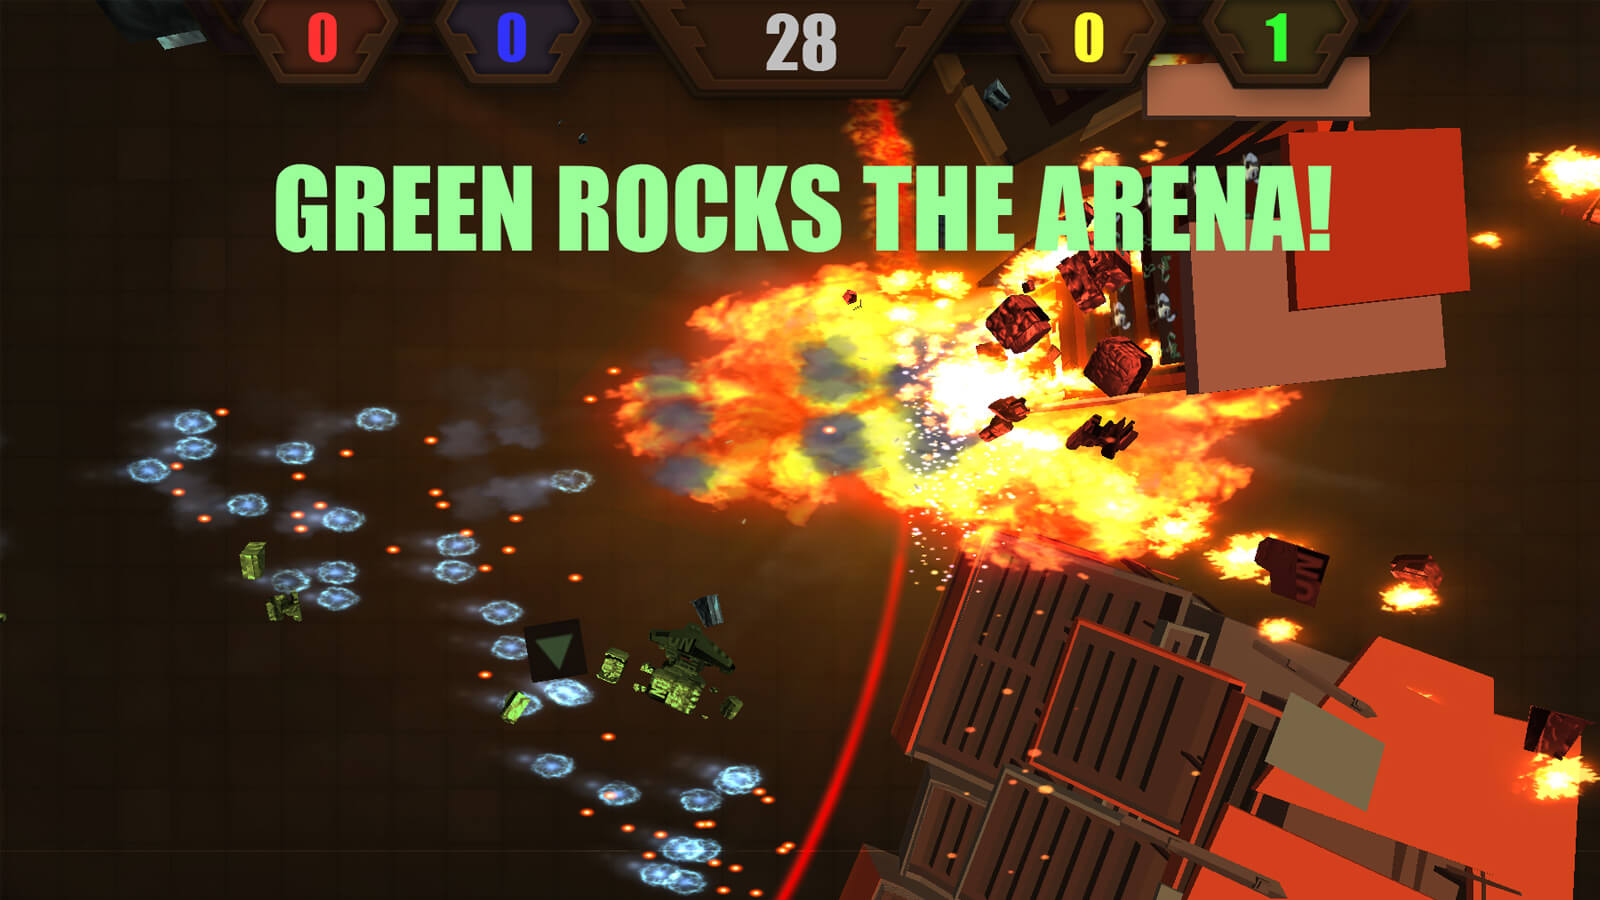 An explosion blows bits of vehicle parts in the air with the words "GREEN ROCKS THE ARENA" on the screen.